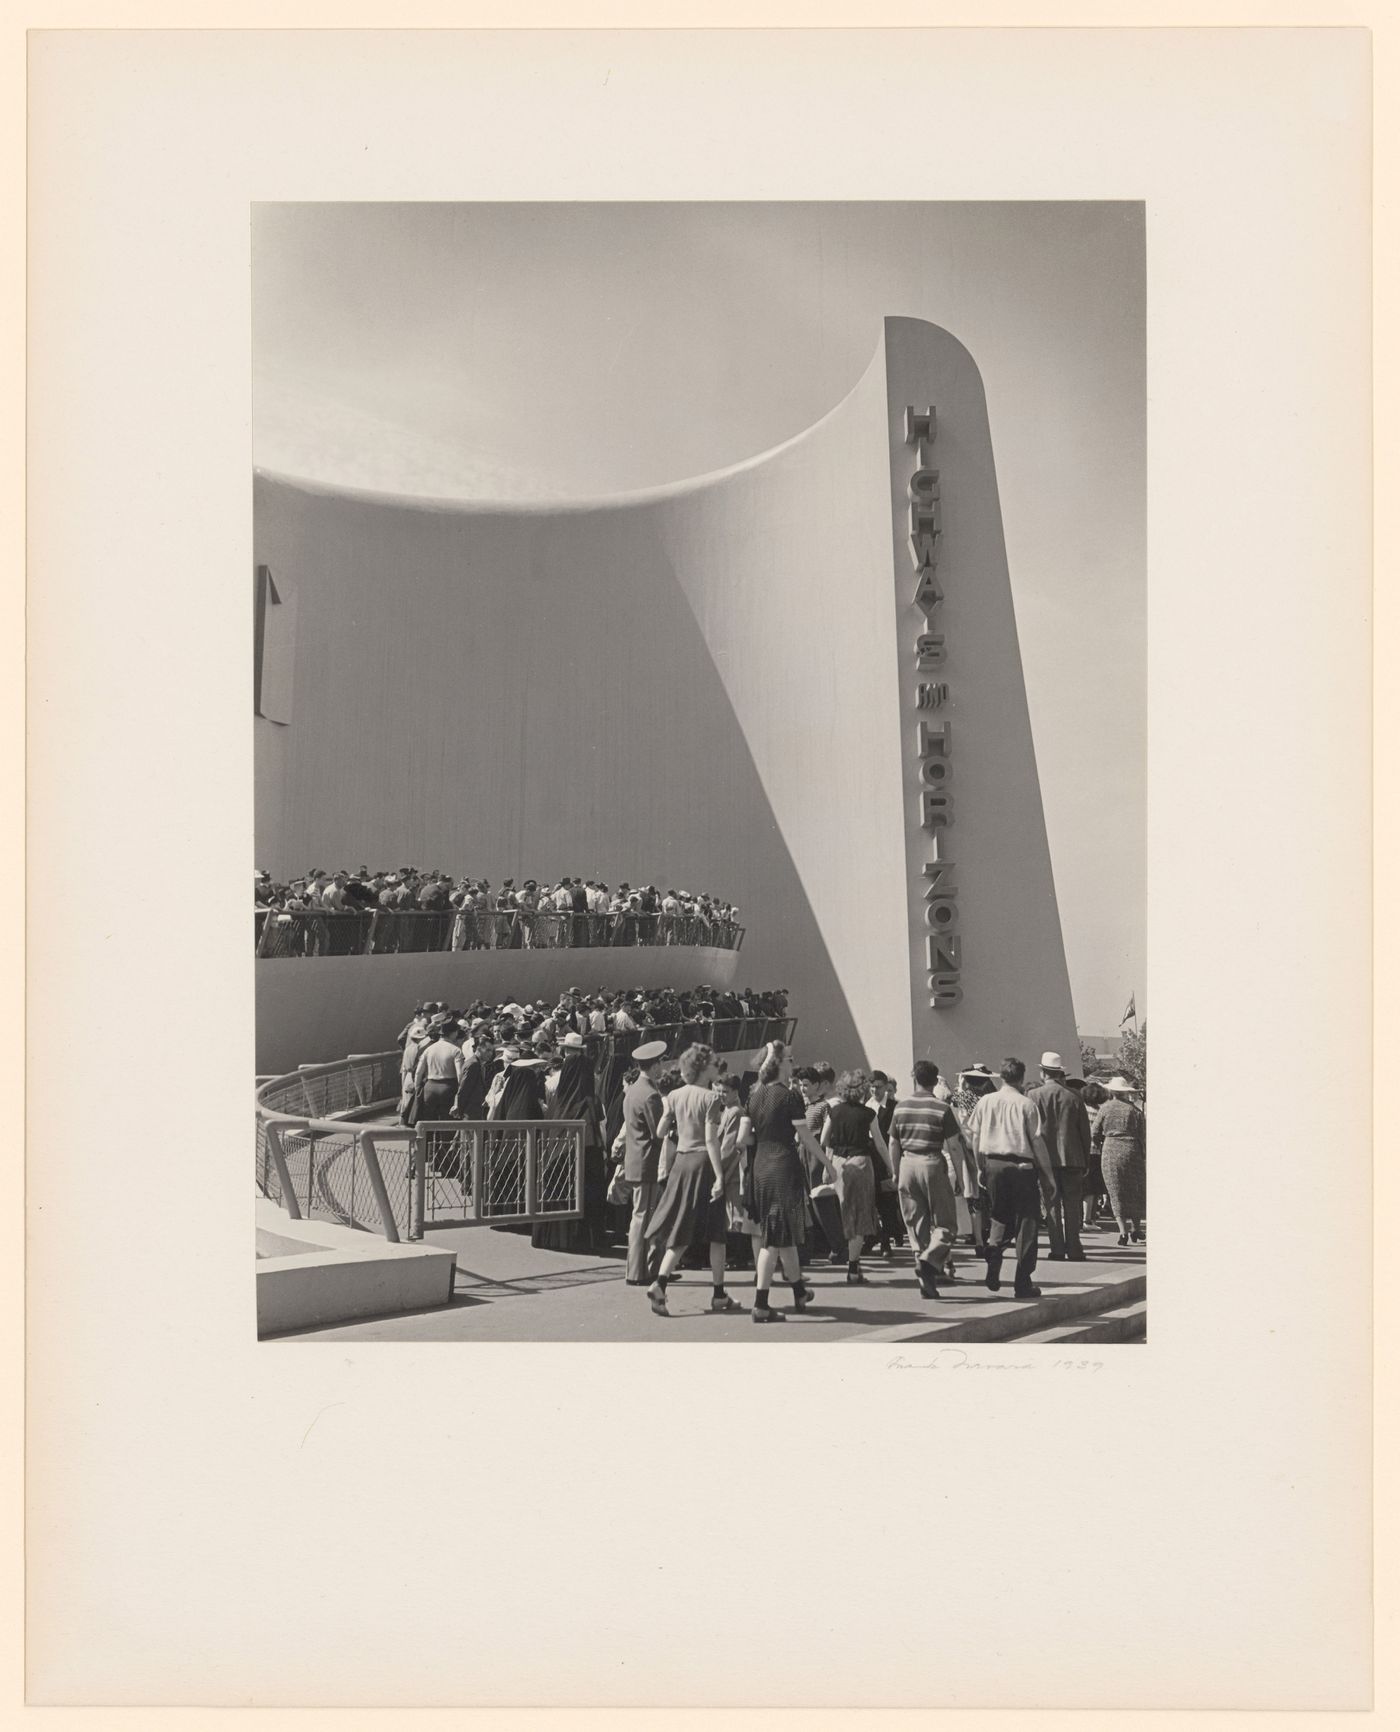 New York World's Fair (1939-1940): Crowds waiting in line at the General Motors "Highways and Horizons" complex for the Futurama ride